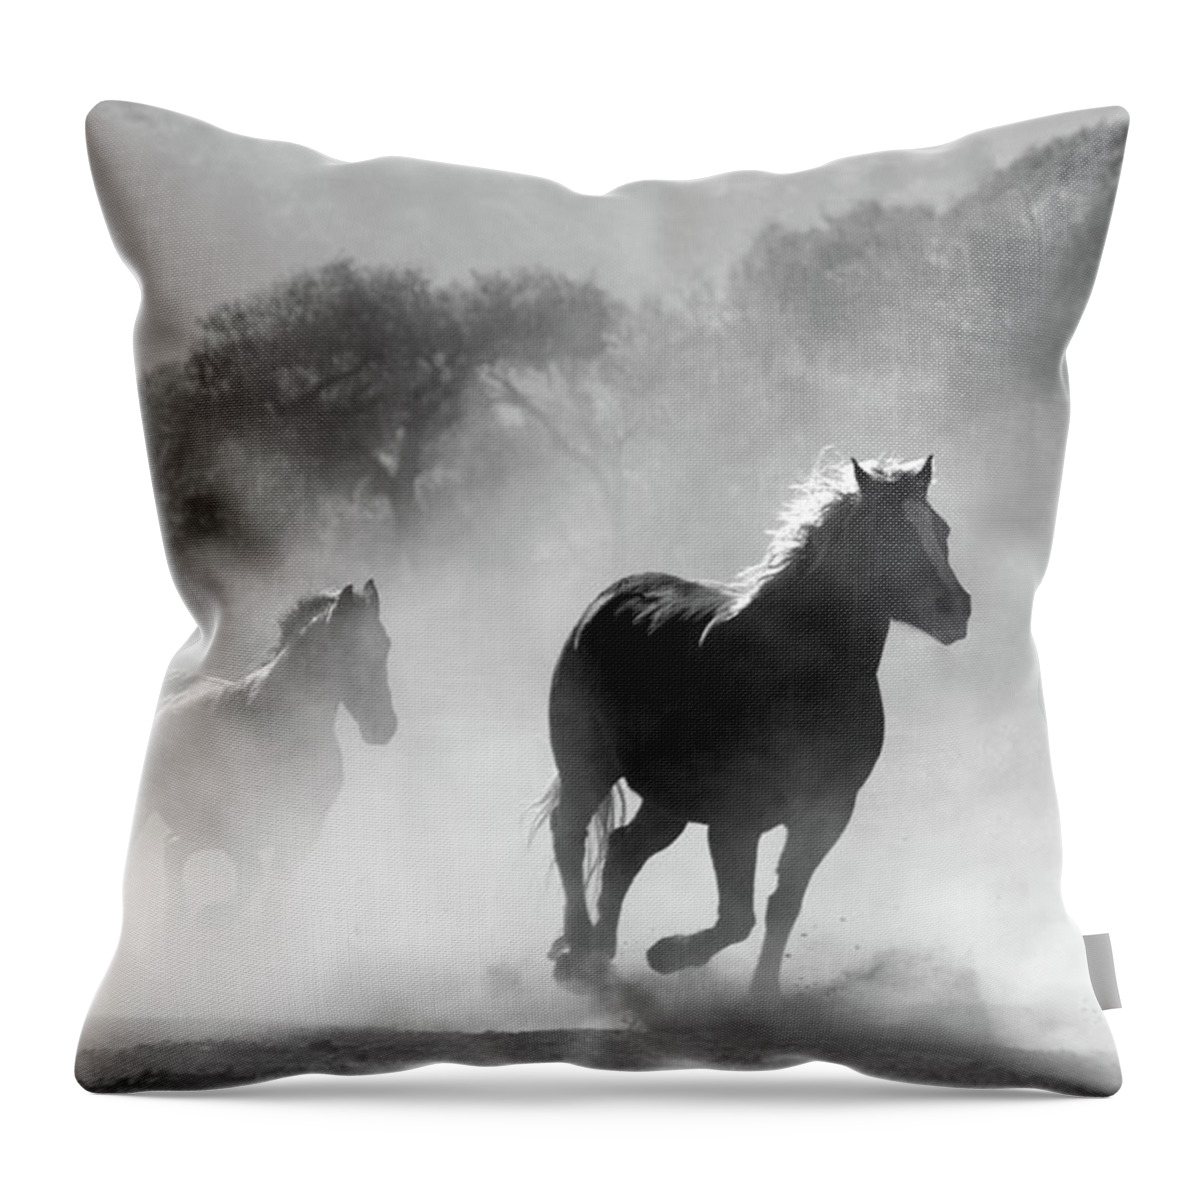 Horse Throw Pillow featuring the photograph Wild Horses Black And White Art #1 by Wall Art Prints